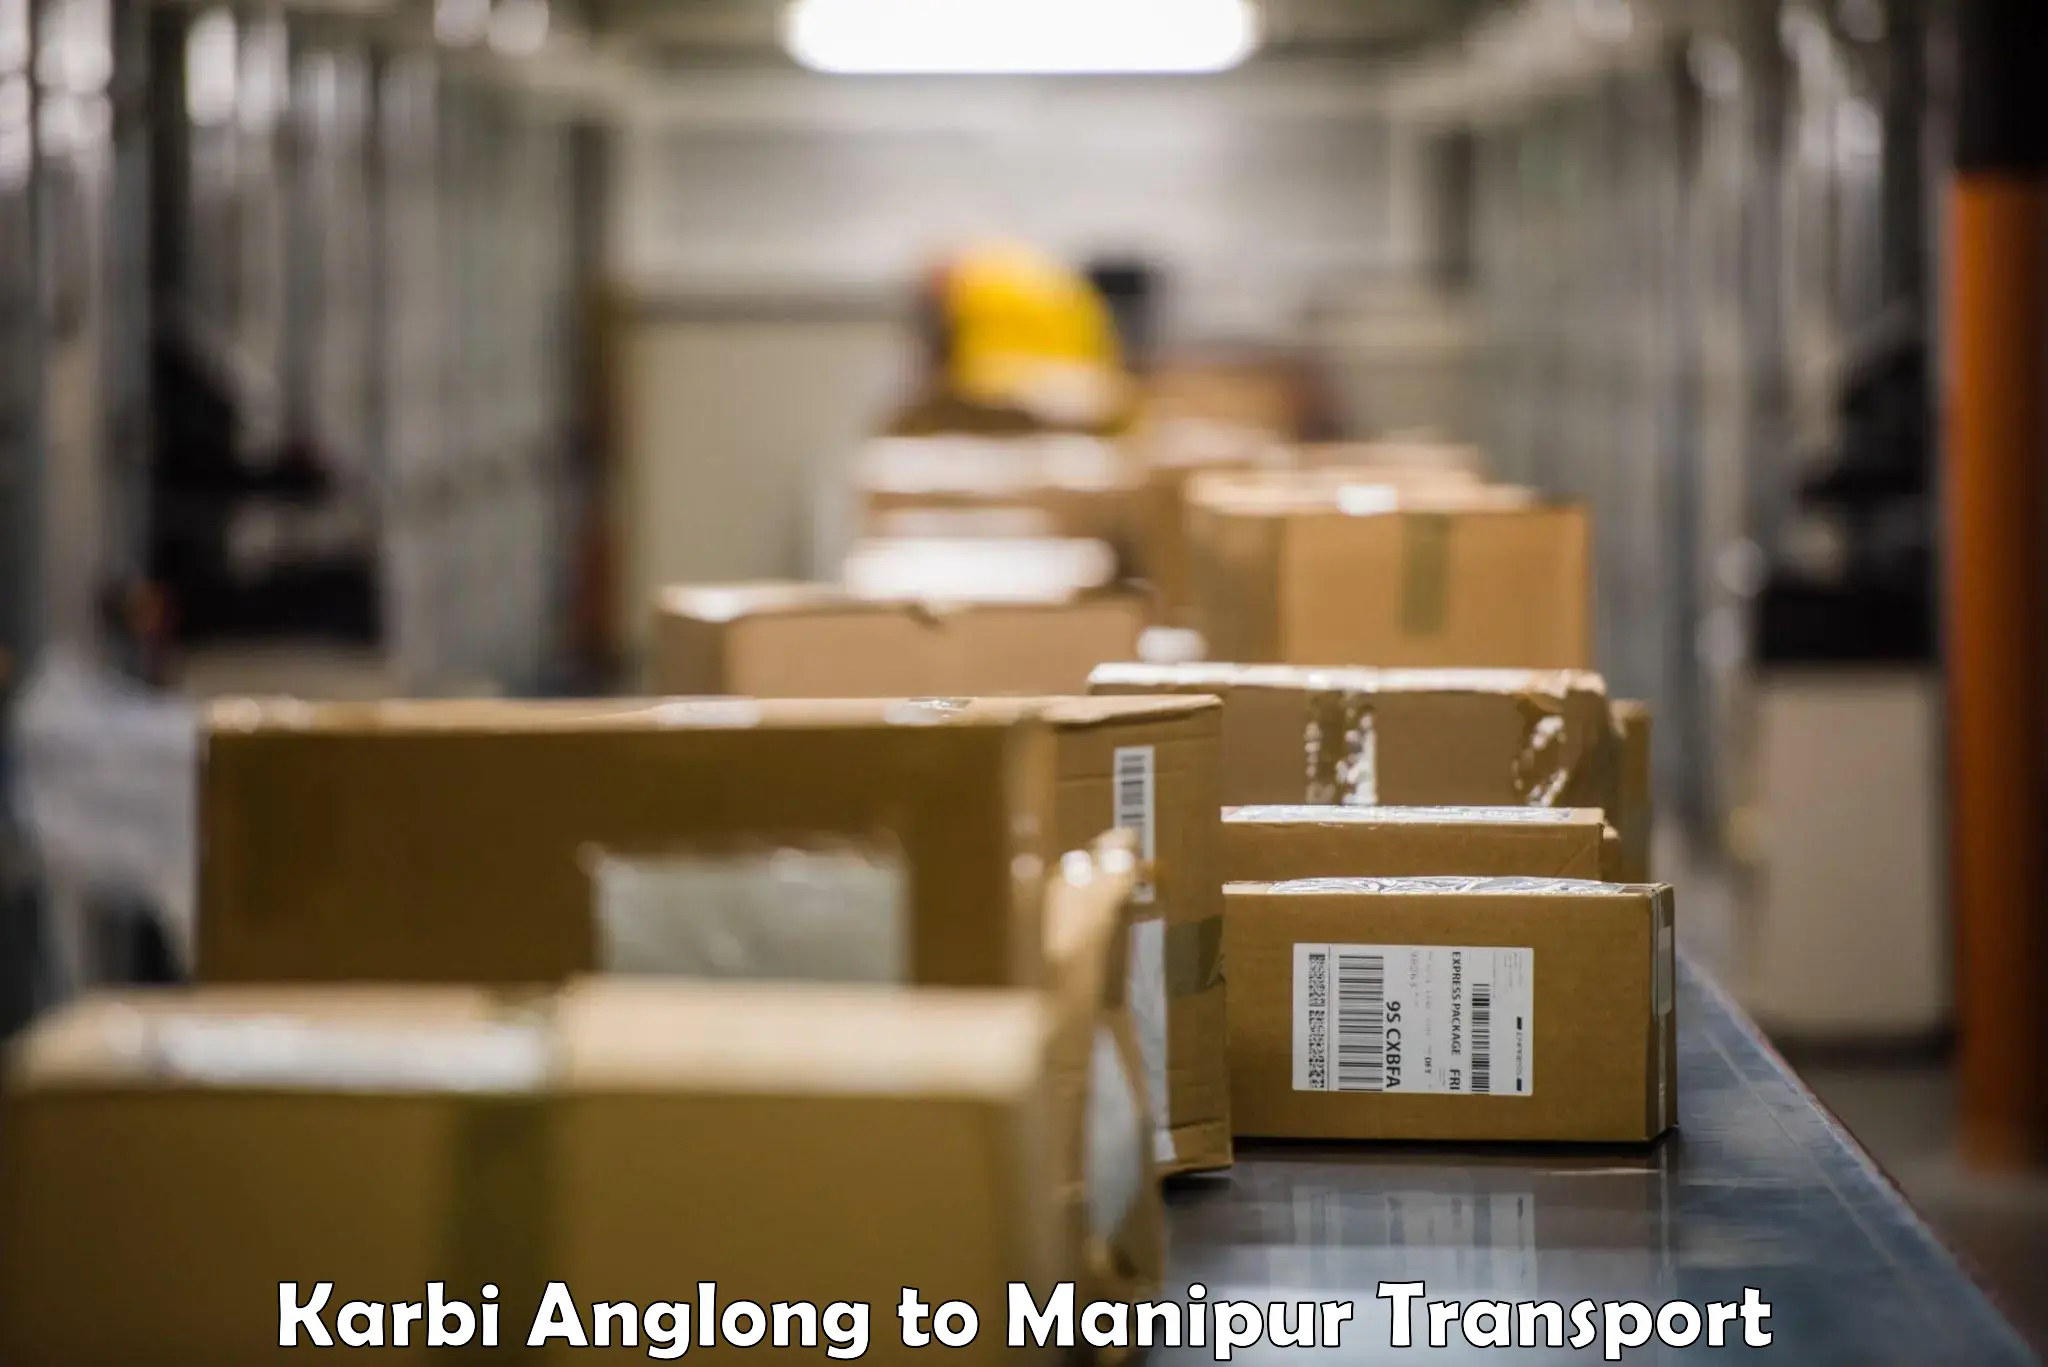 Daily transport service Karbi Anglong to Imphal